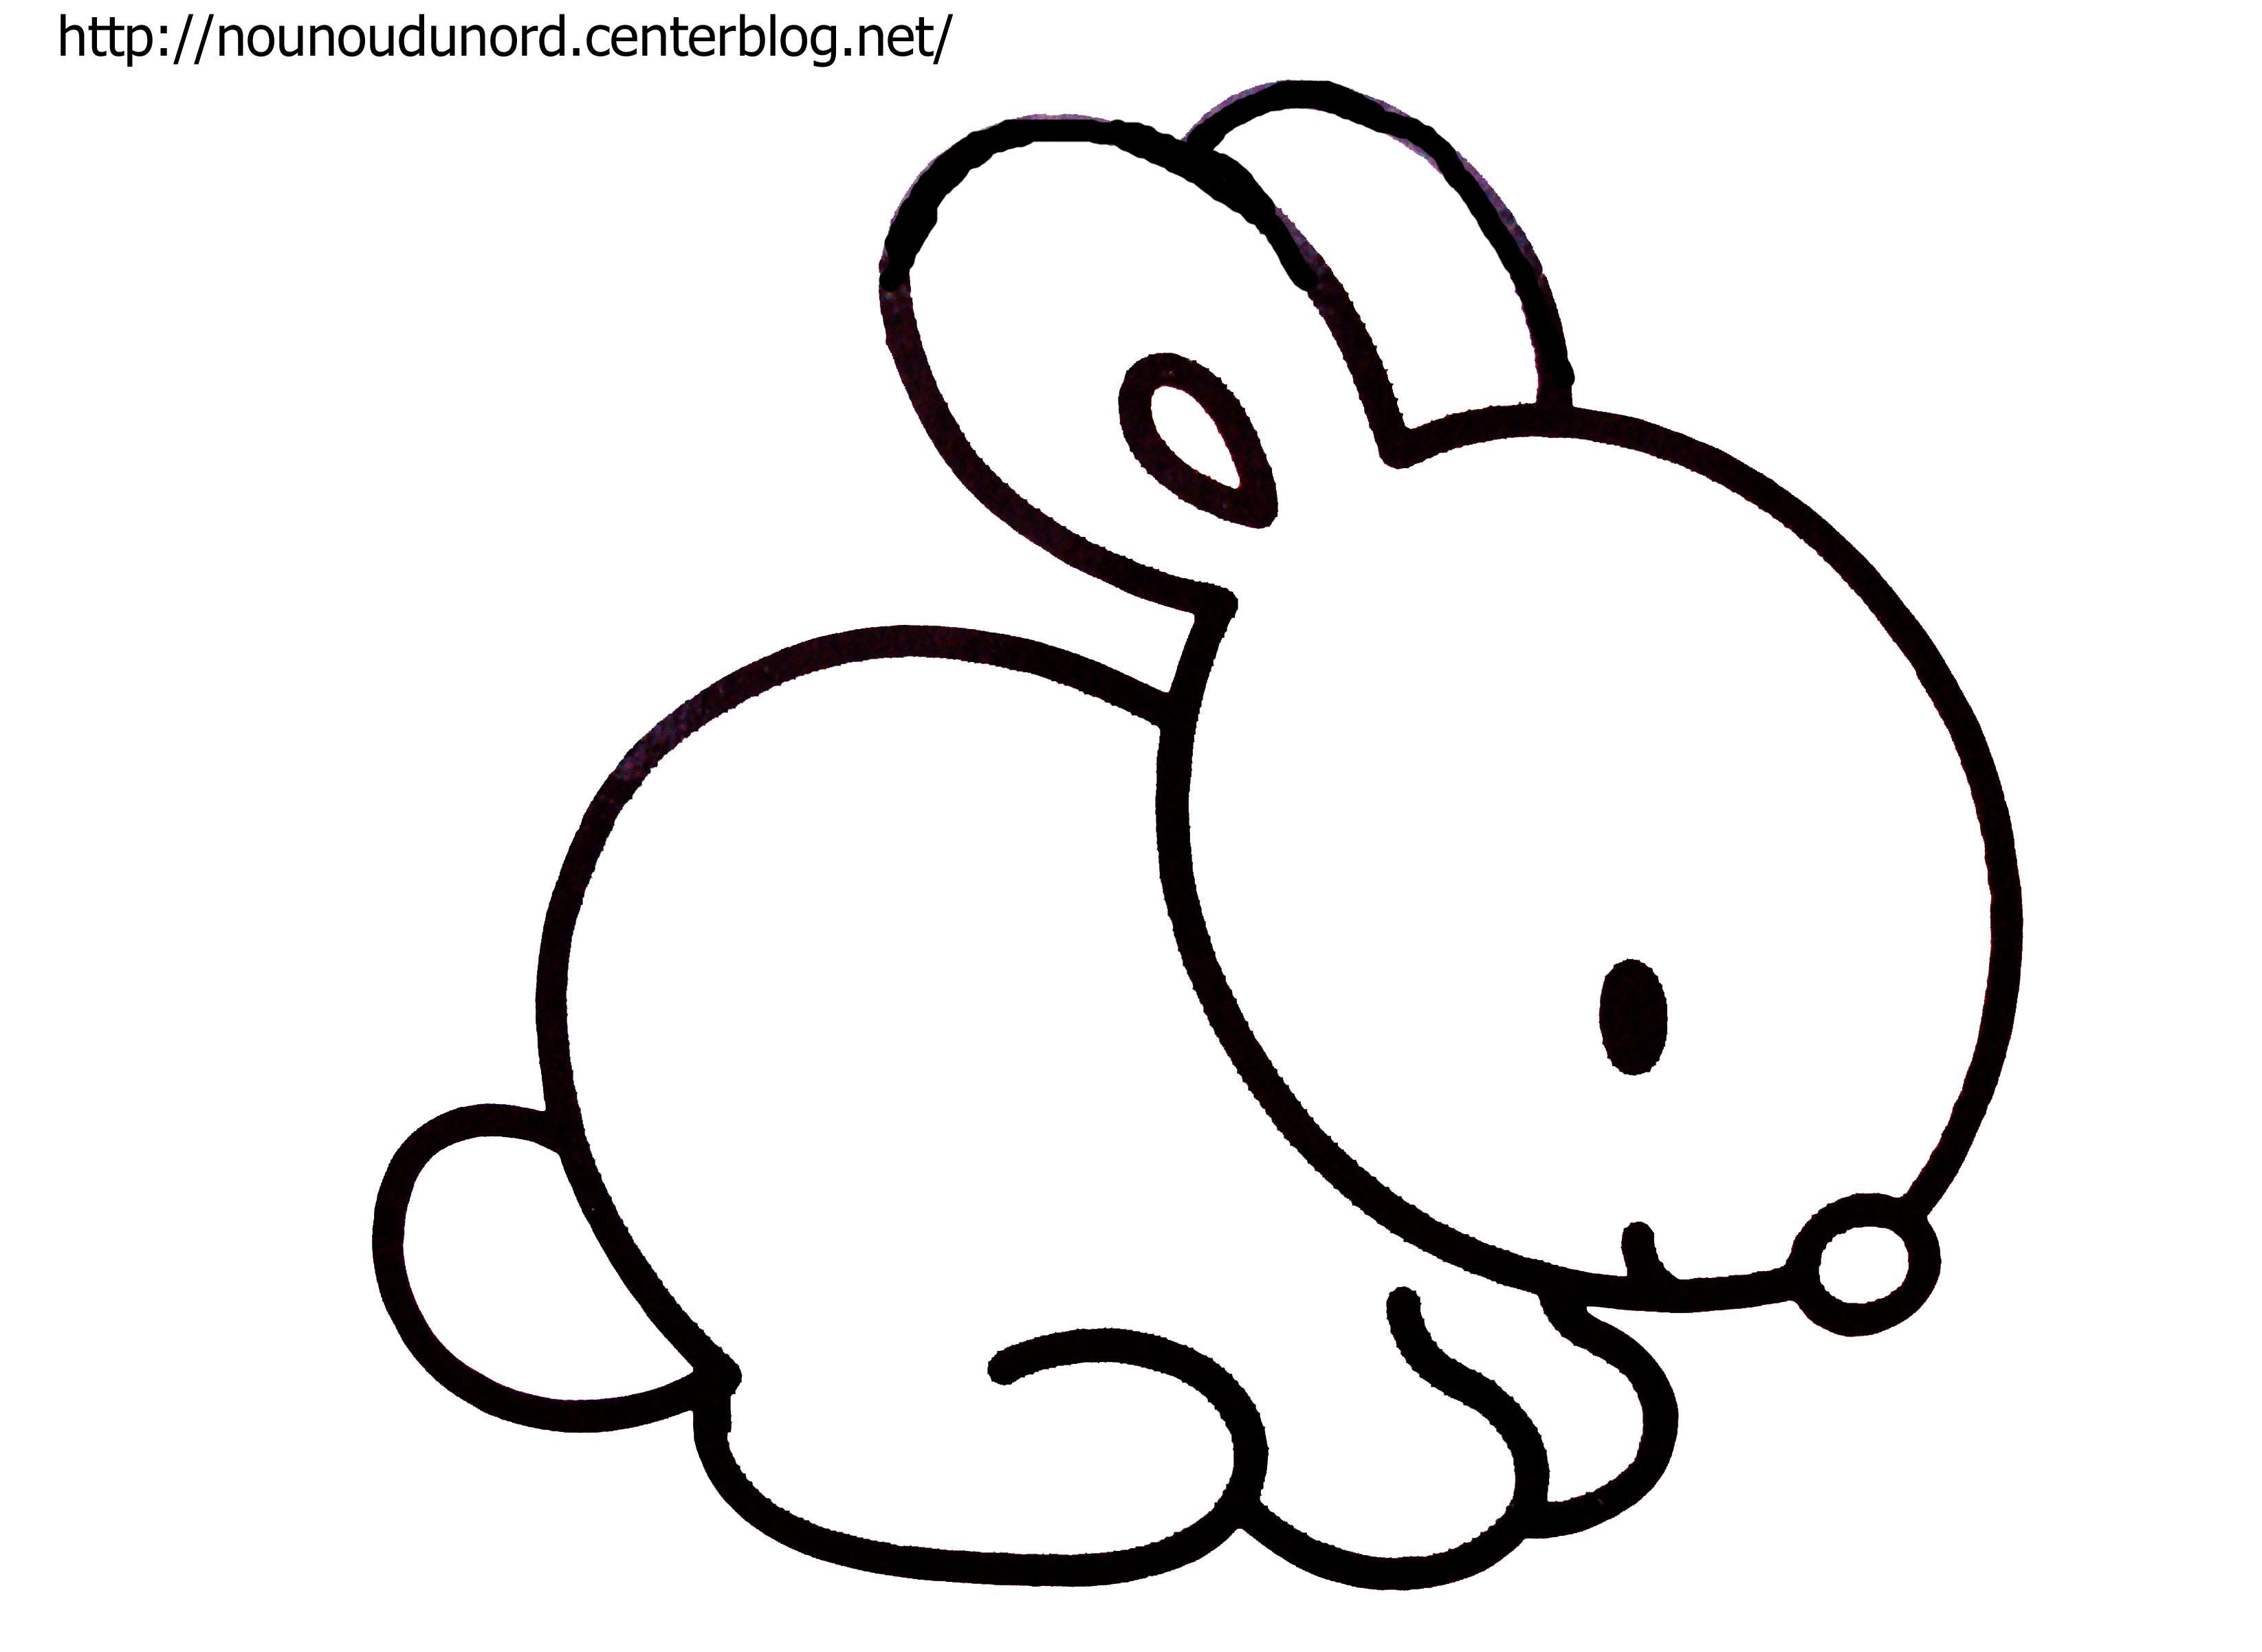 Coloriage Lapin